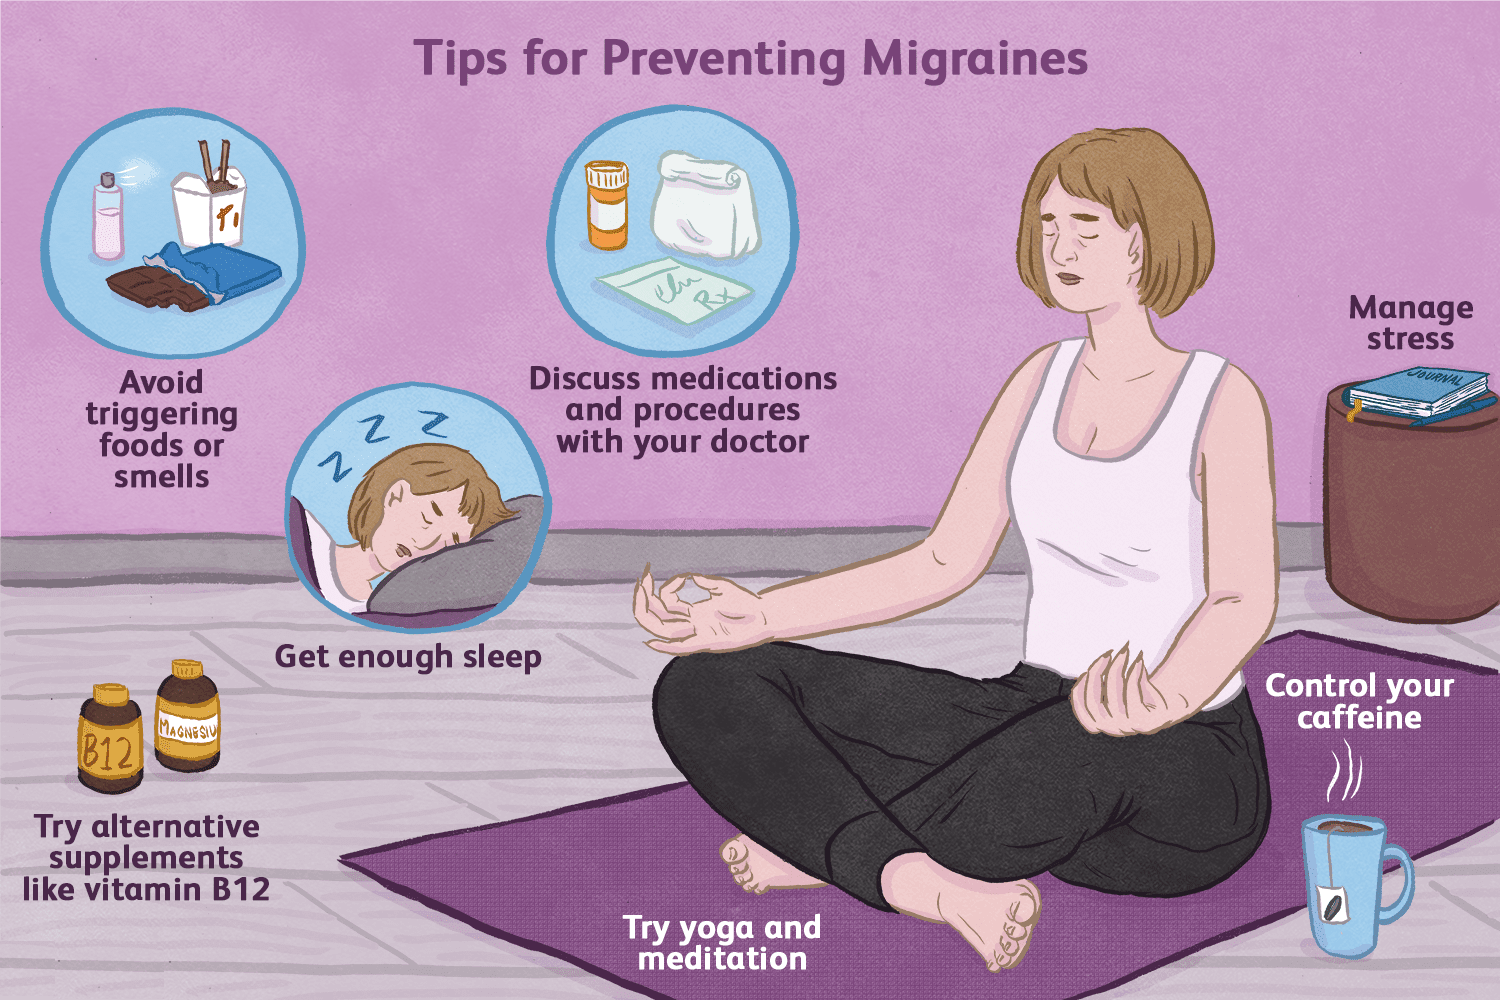 Tips for Preventing Migraines